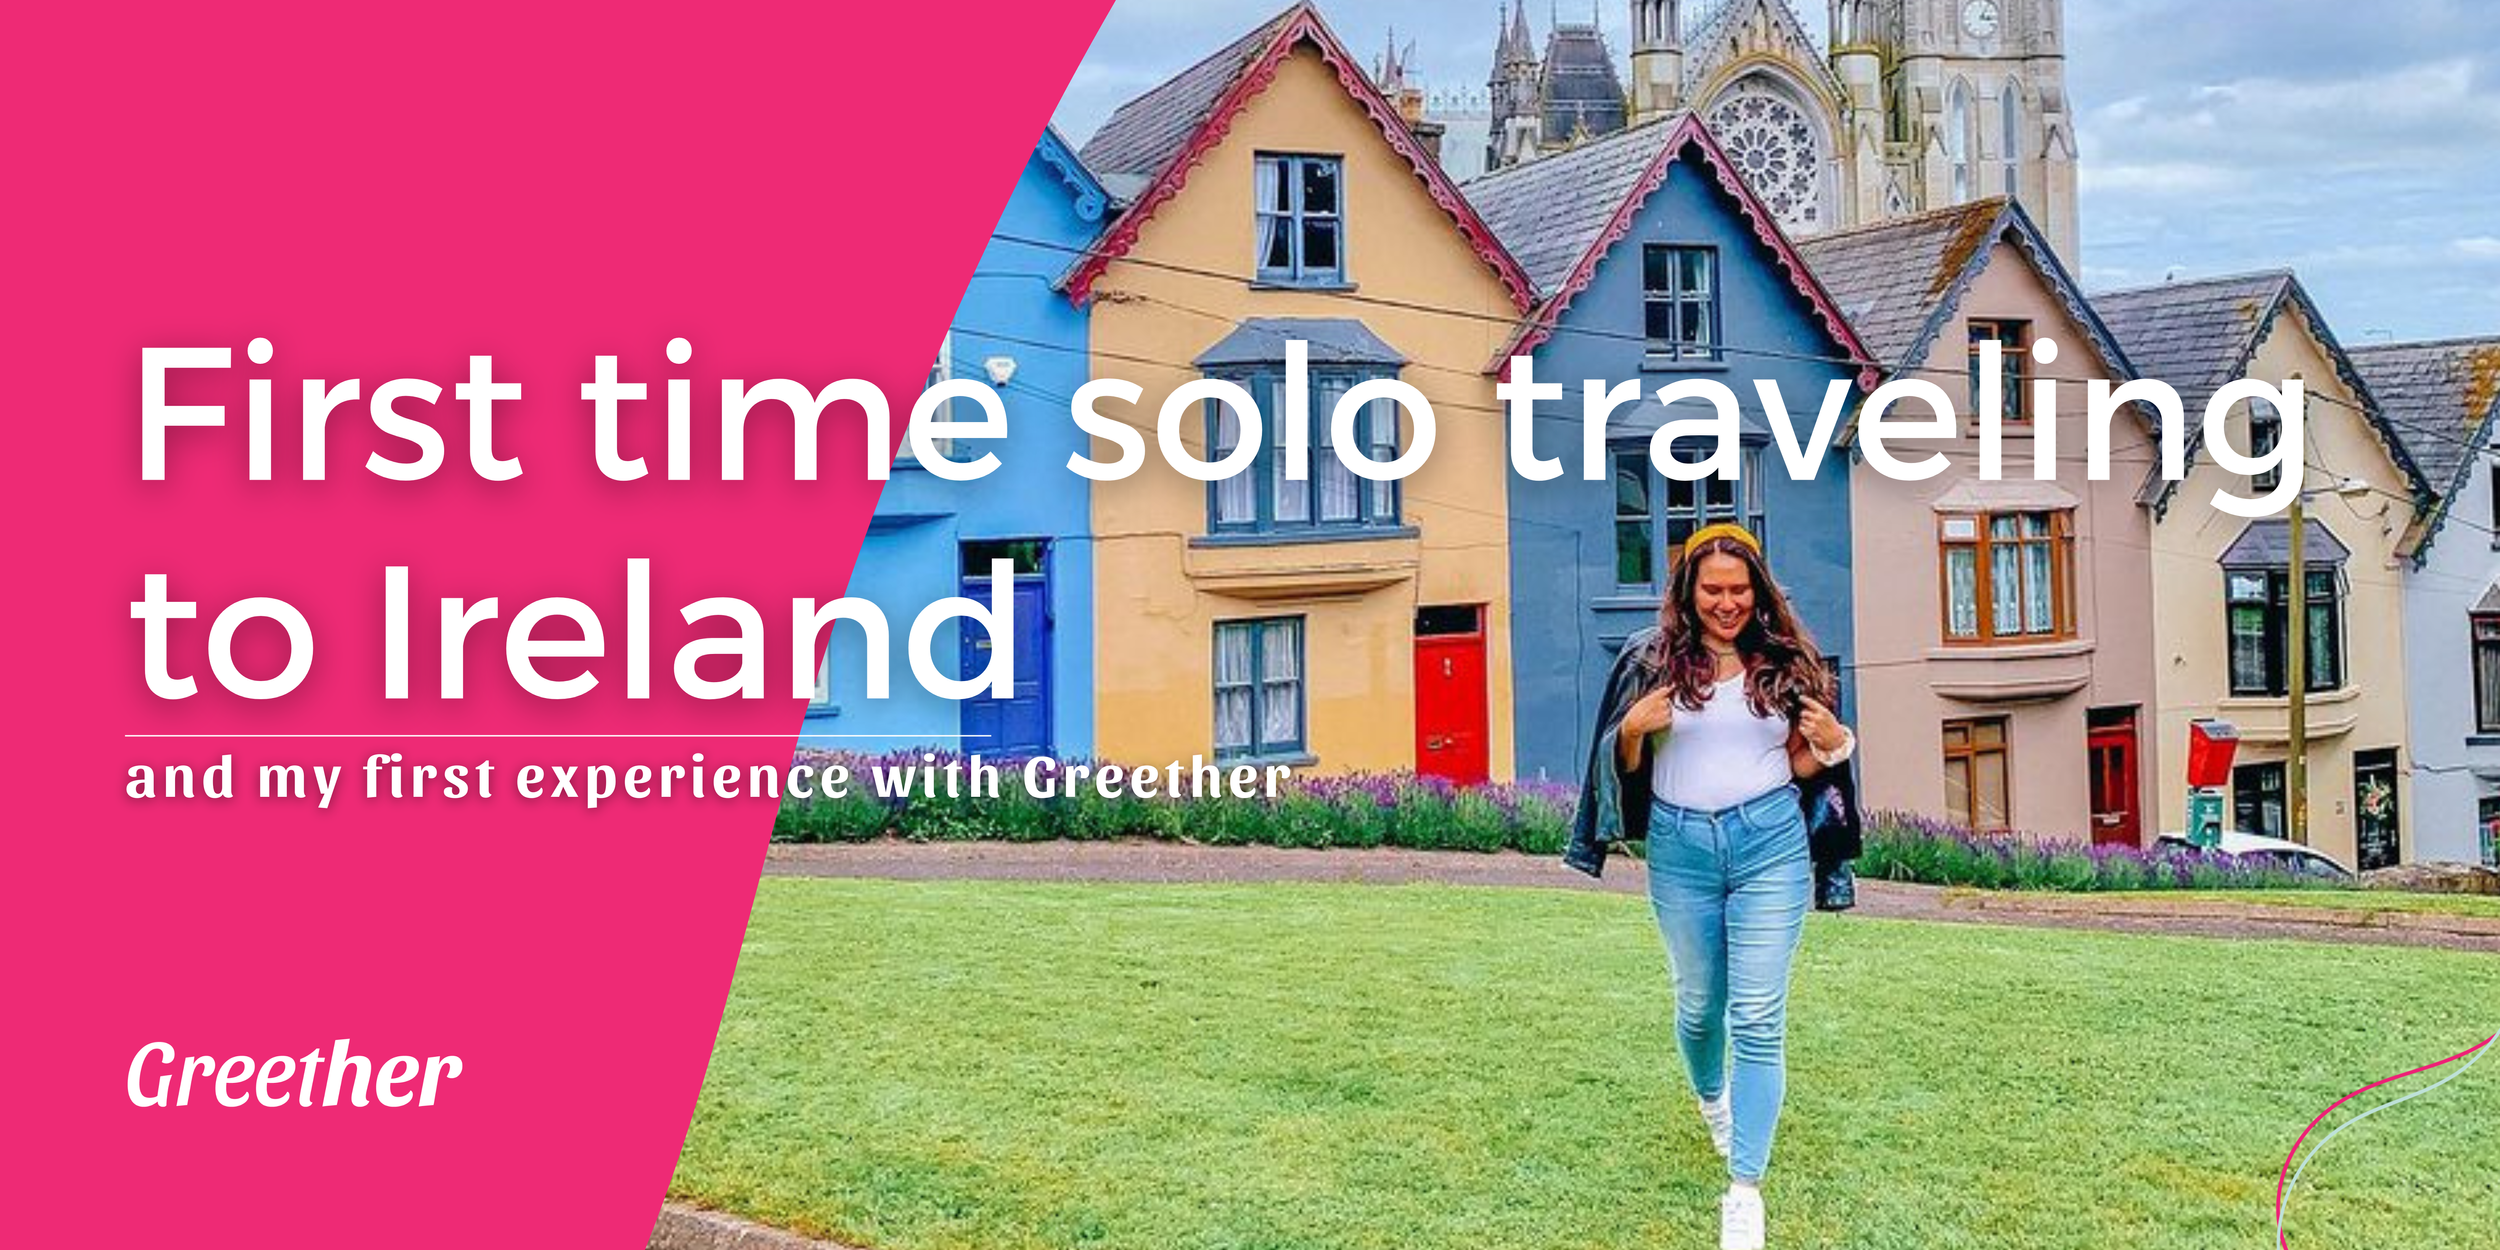 First time solo traveling to Ireland and my first experience with Greether.